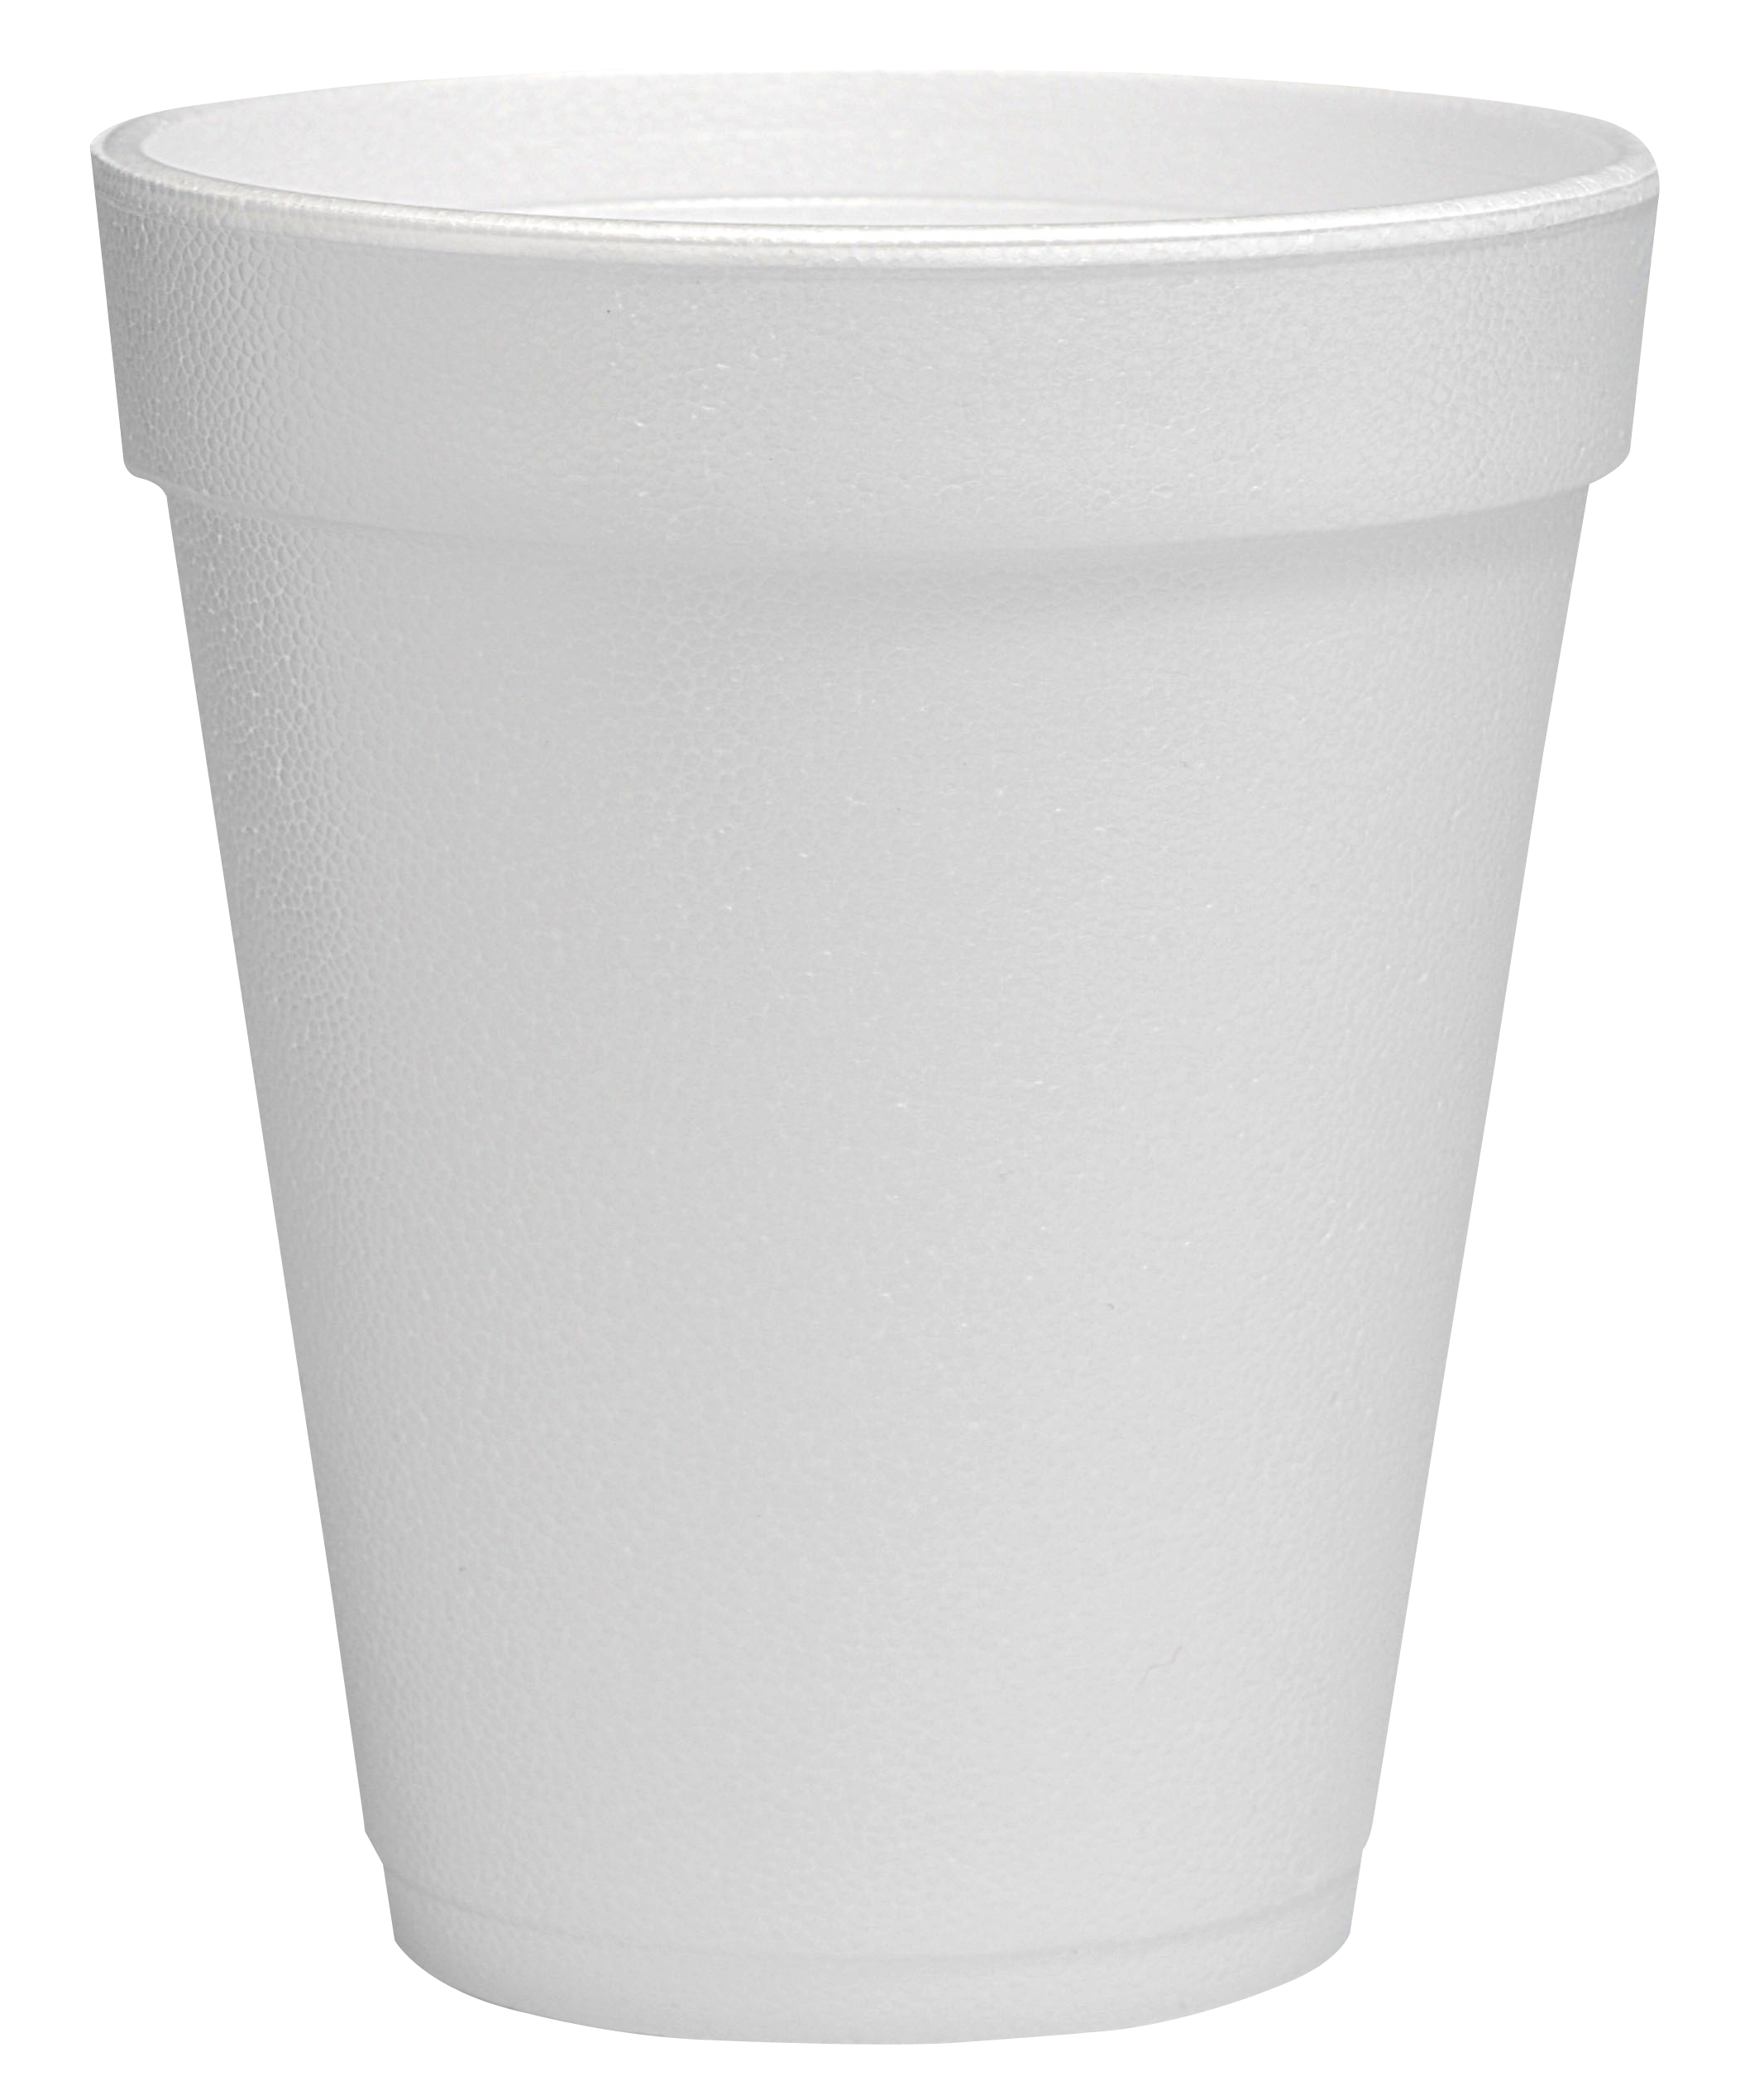 Pin by Kamolwan Amat on design Plastic cup, Cup, Plastic